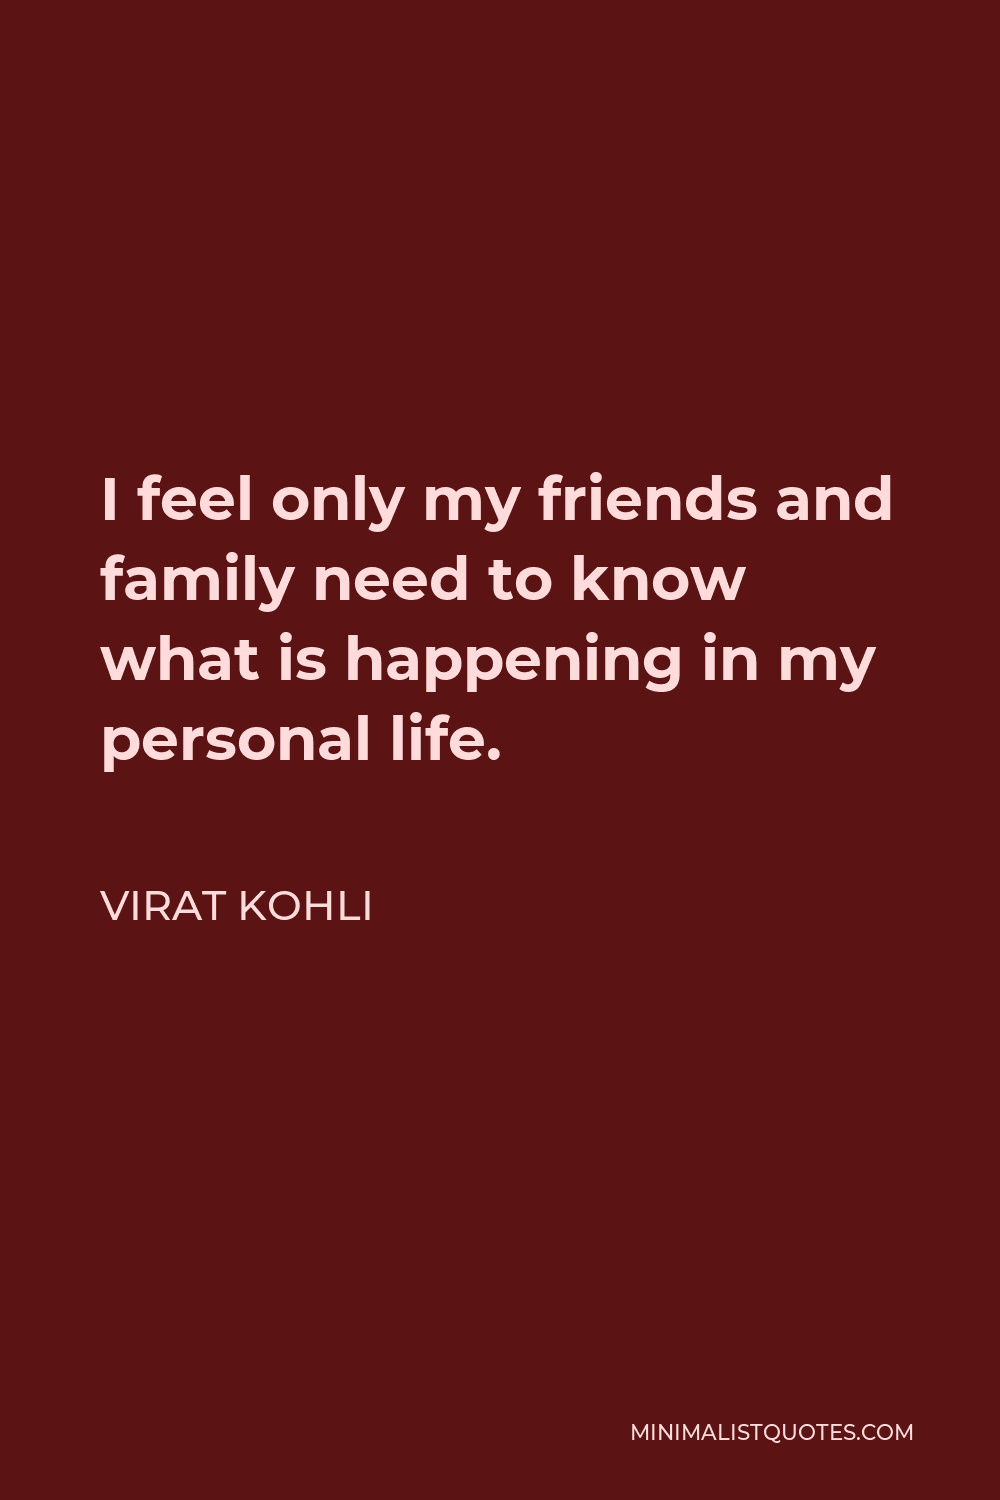 Virat Kohli Quote - I feel only my friends and family need to know what is happening in my personal life.